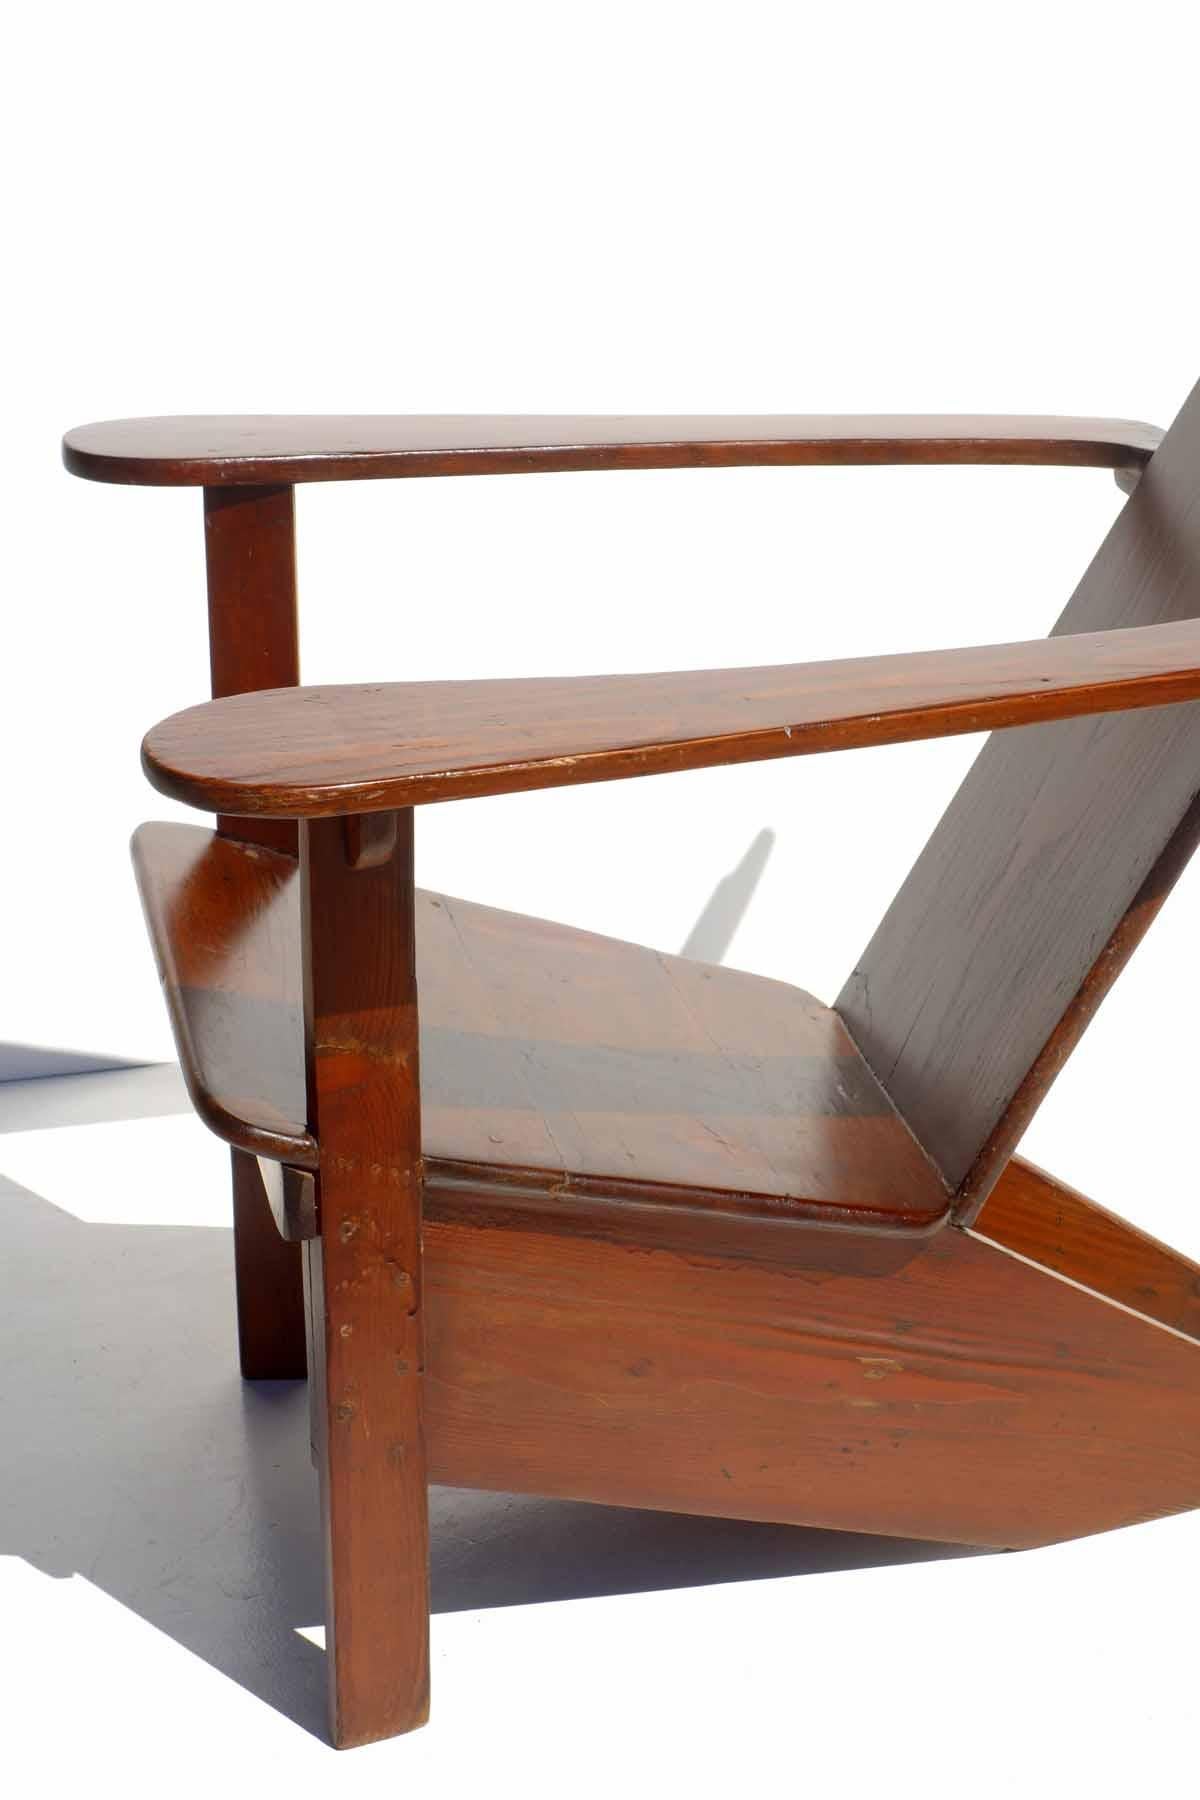 Early 20th Century 1930s Gino Levi Montalcini Italian Design Rationalist Wood Lounge Chair For Sale